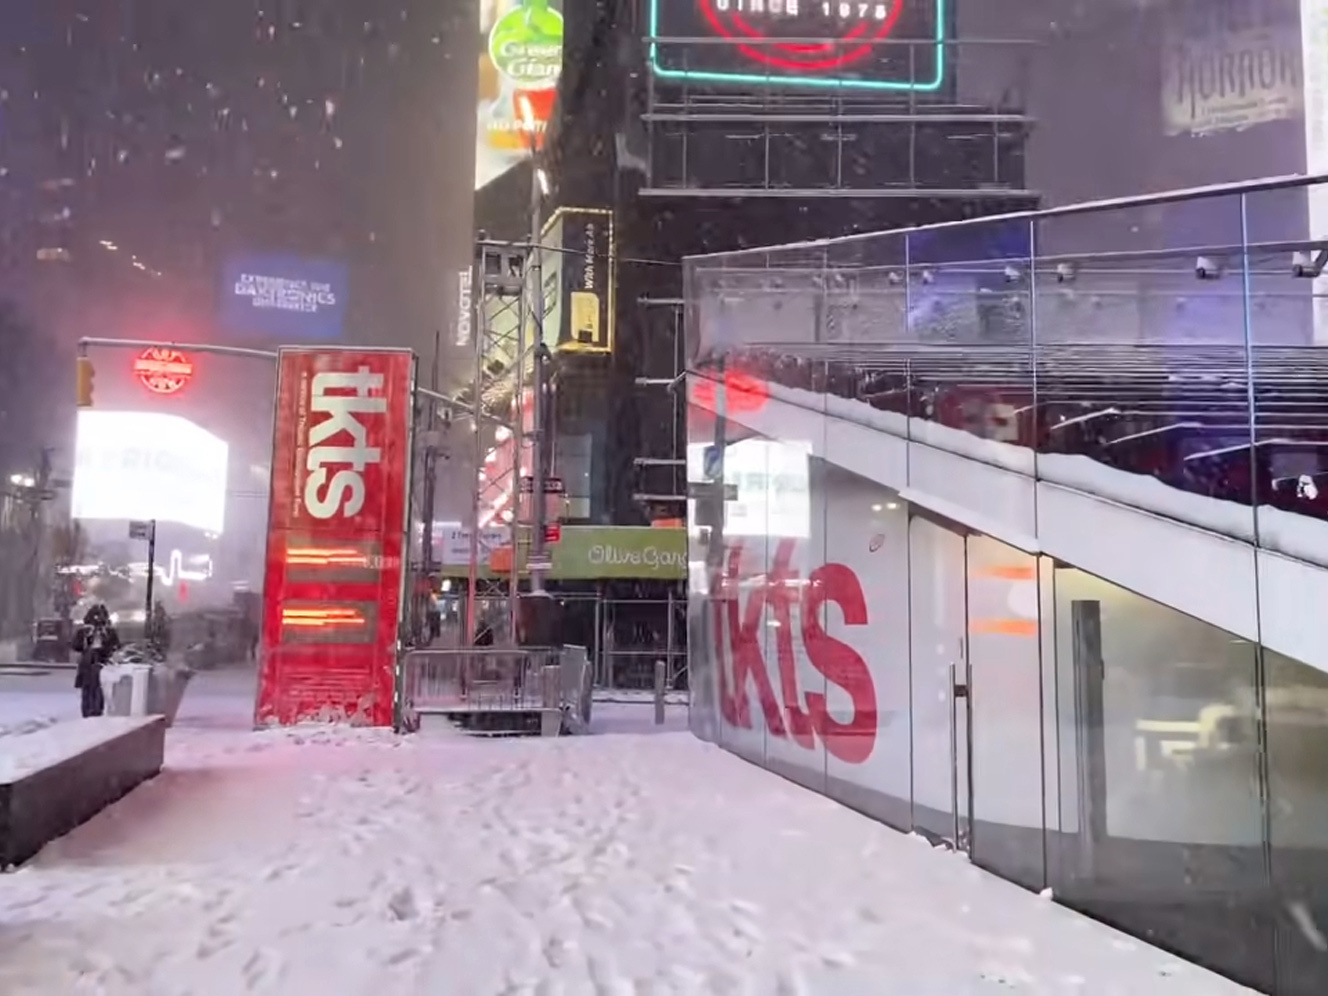 TKTS Ticket Booth Times Square NYC in a Snow Storm